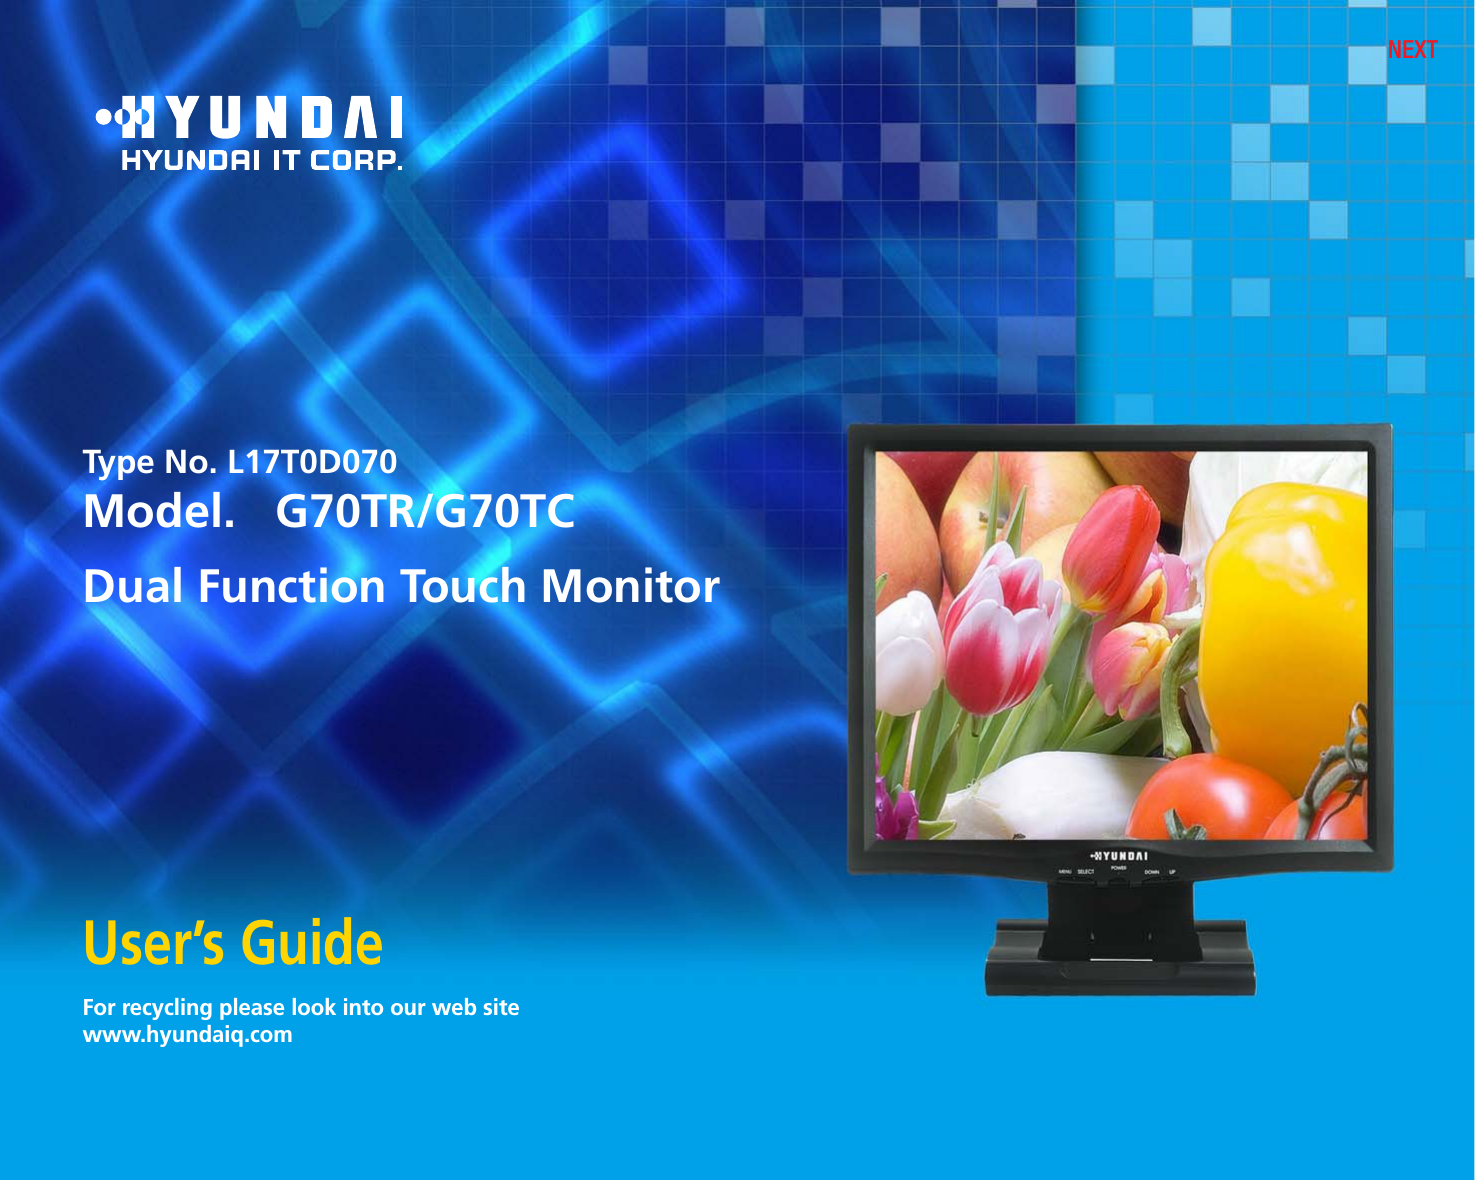 NEXTFor recycling please look into our web site www.hyundaiq.comUser’s GuideType No. L17T0D070Model.   G70TR/G70TC            Dual Function Touch Monitor